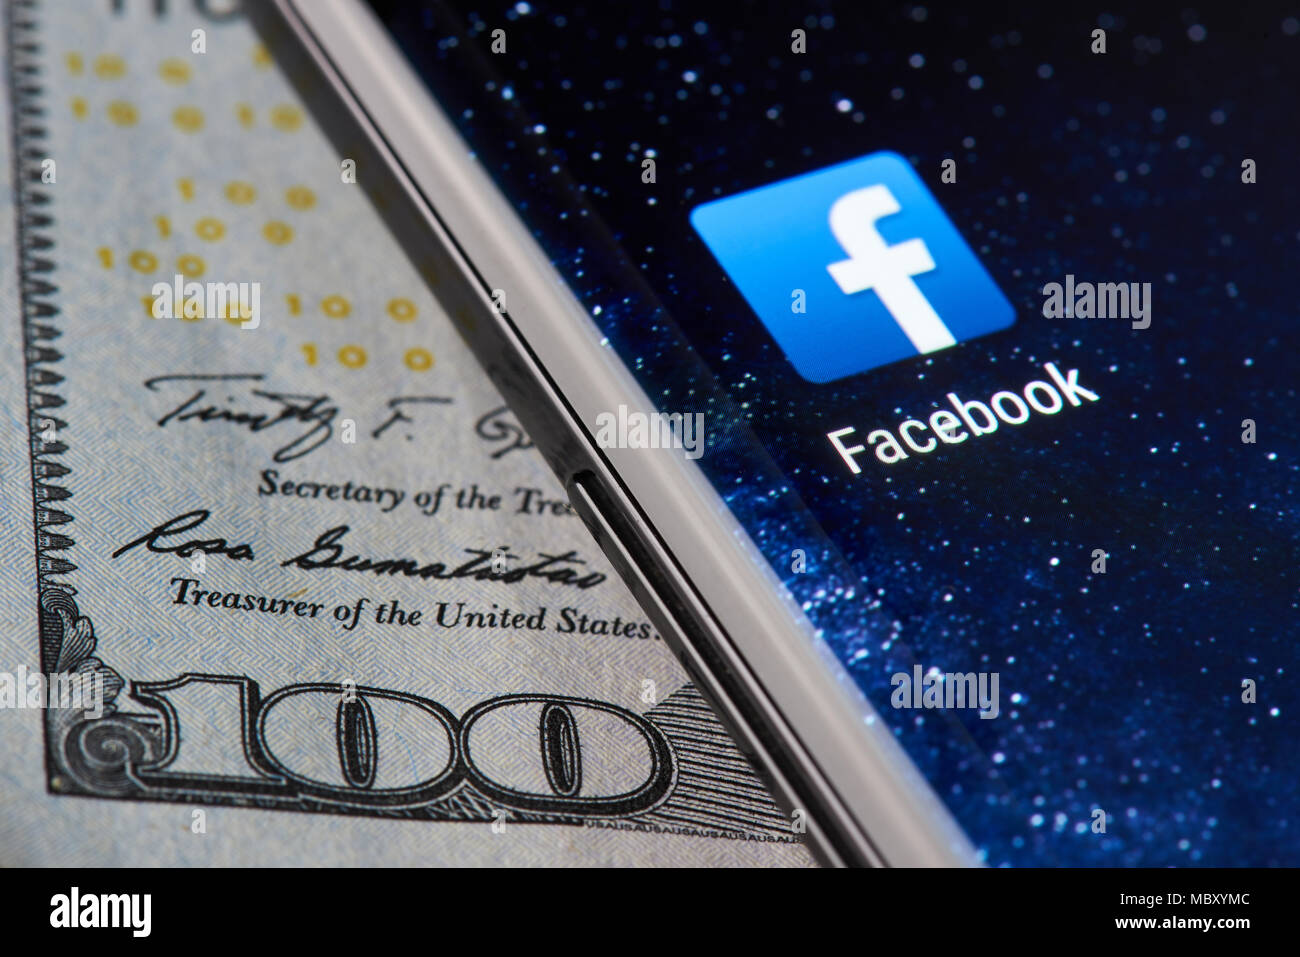 New york, USA - April 11, 2018: Facebook icon app on smartphone close-up on dollar currency background Stock Photo